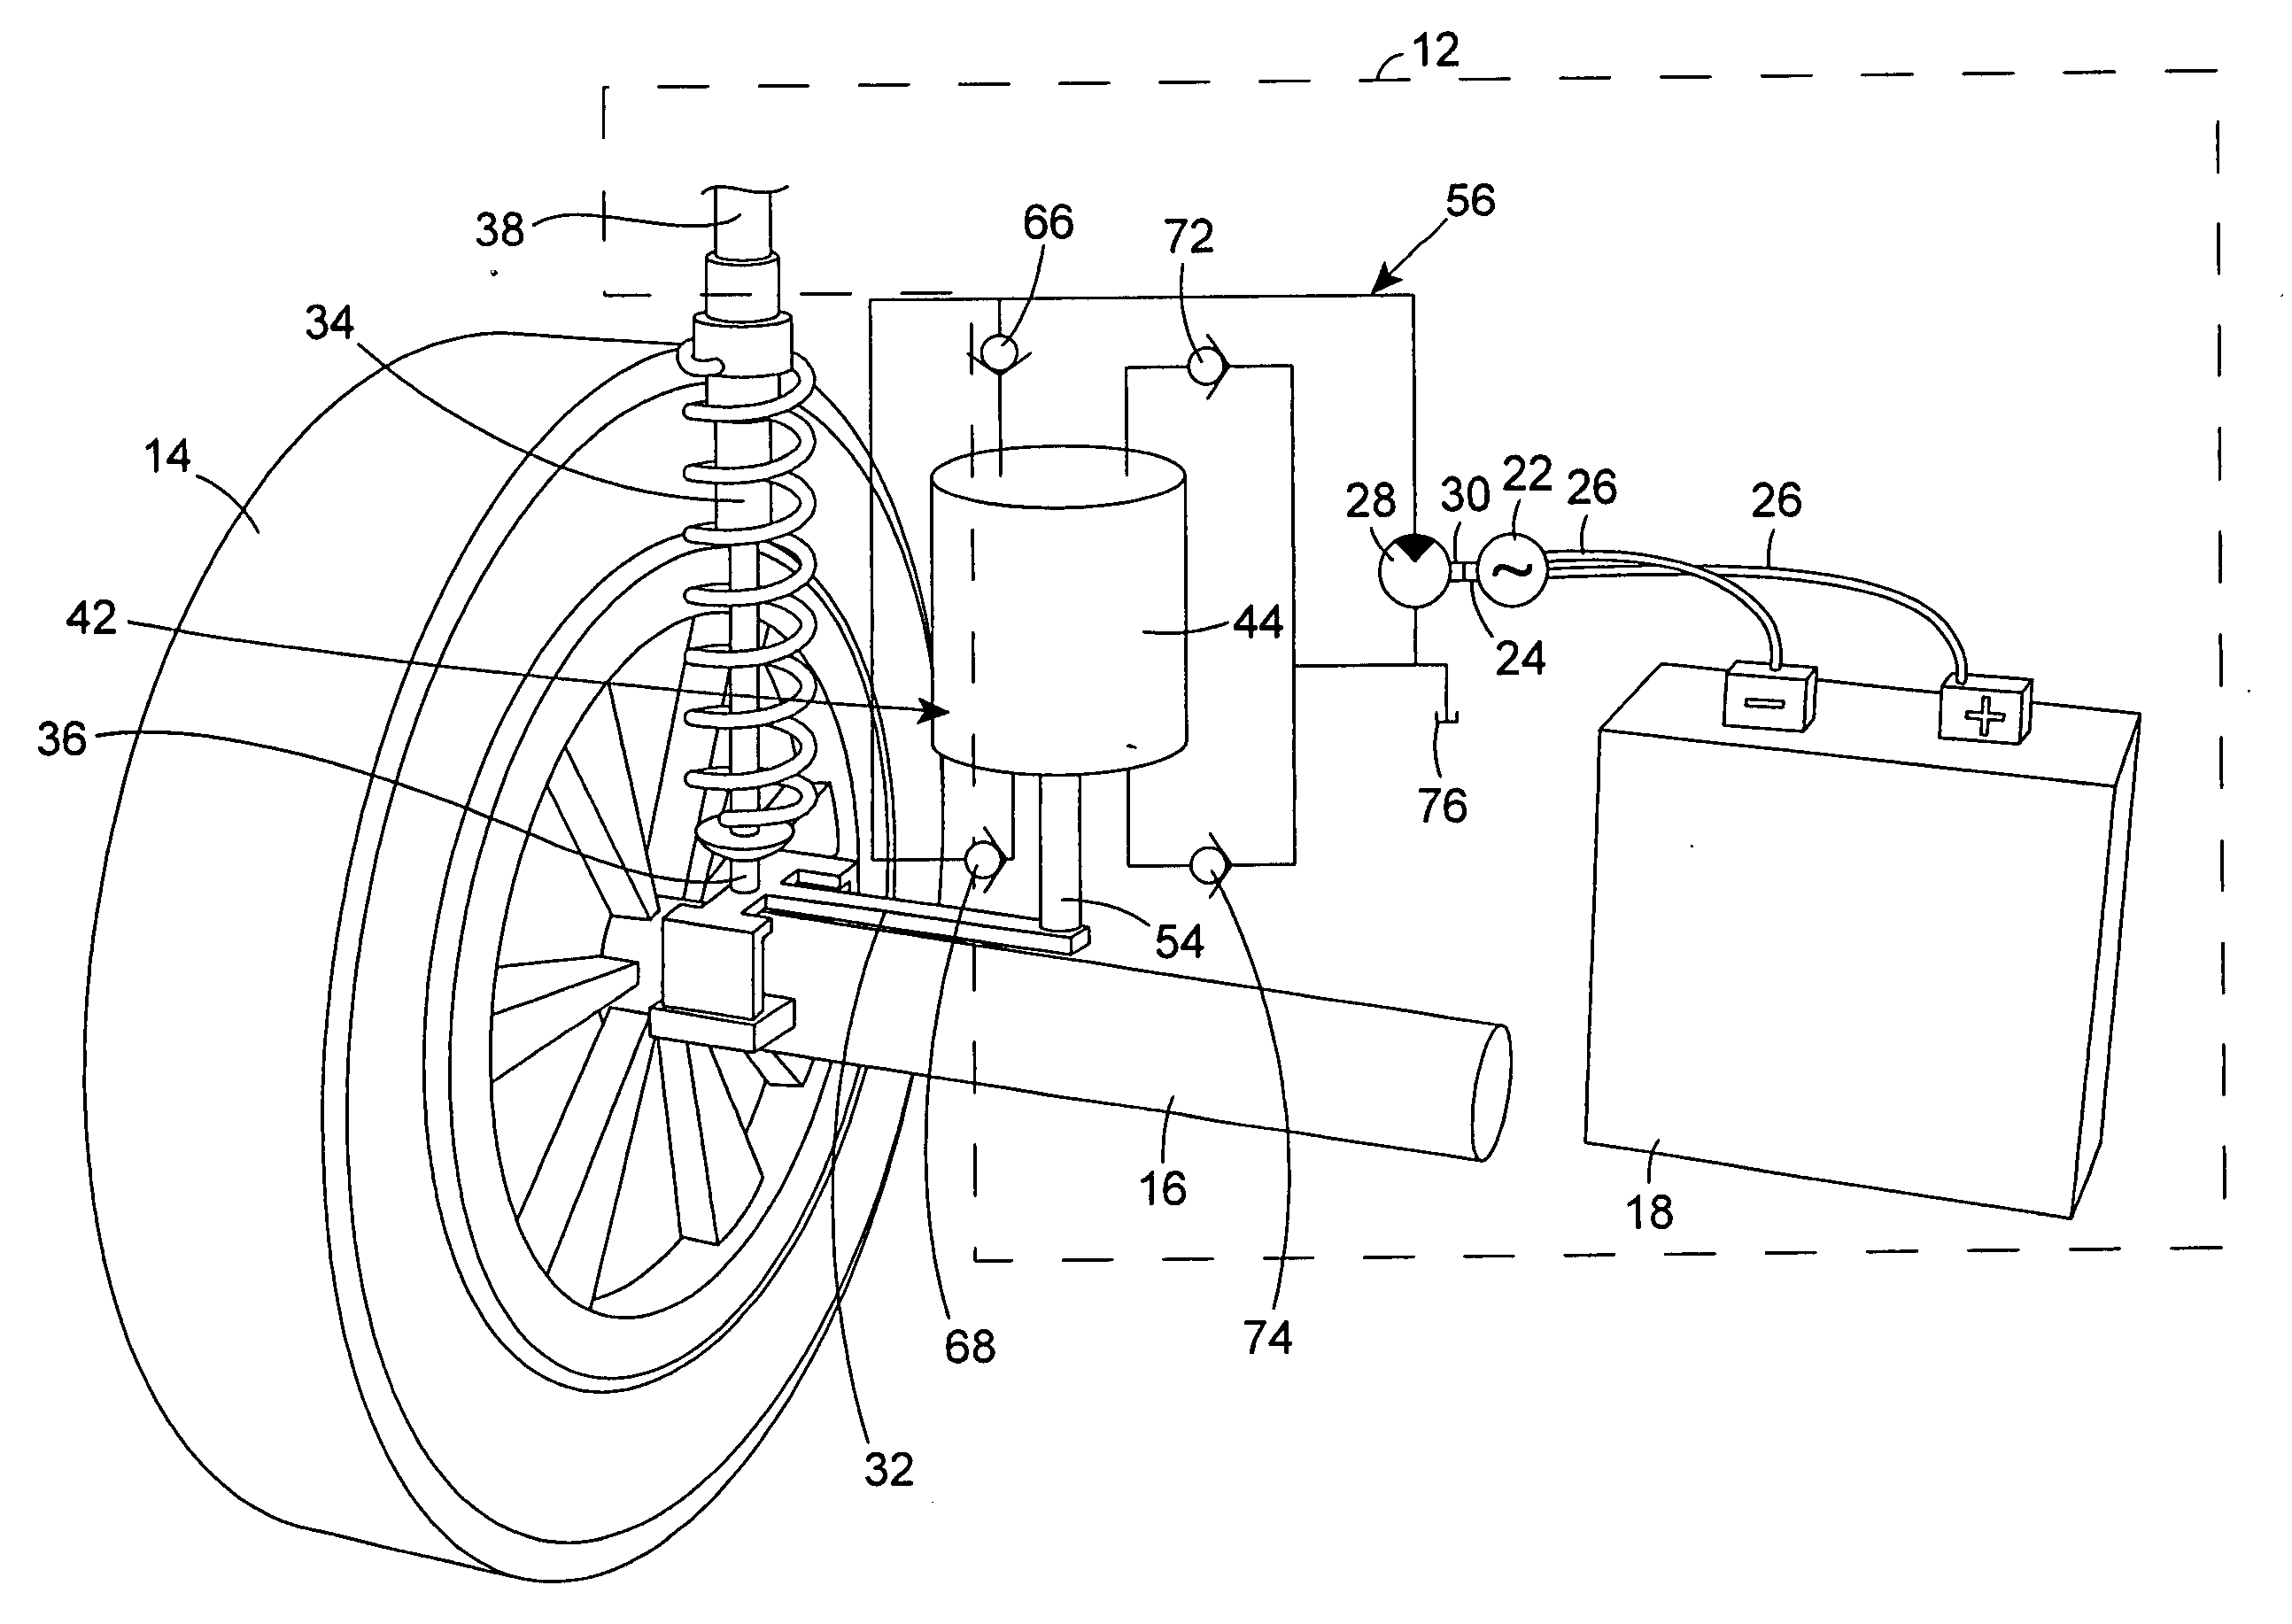 Apparatus and method for hydraulically converting movement of a vehicle wheel to electricity for charging a vehicle battery